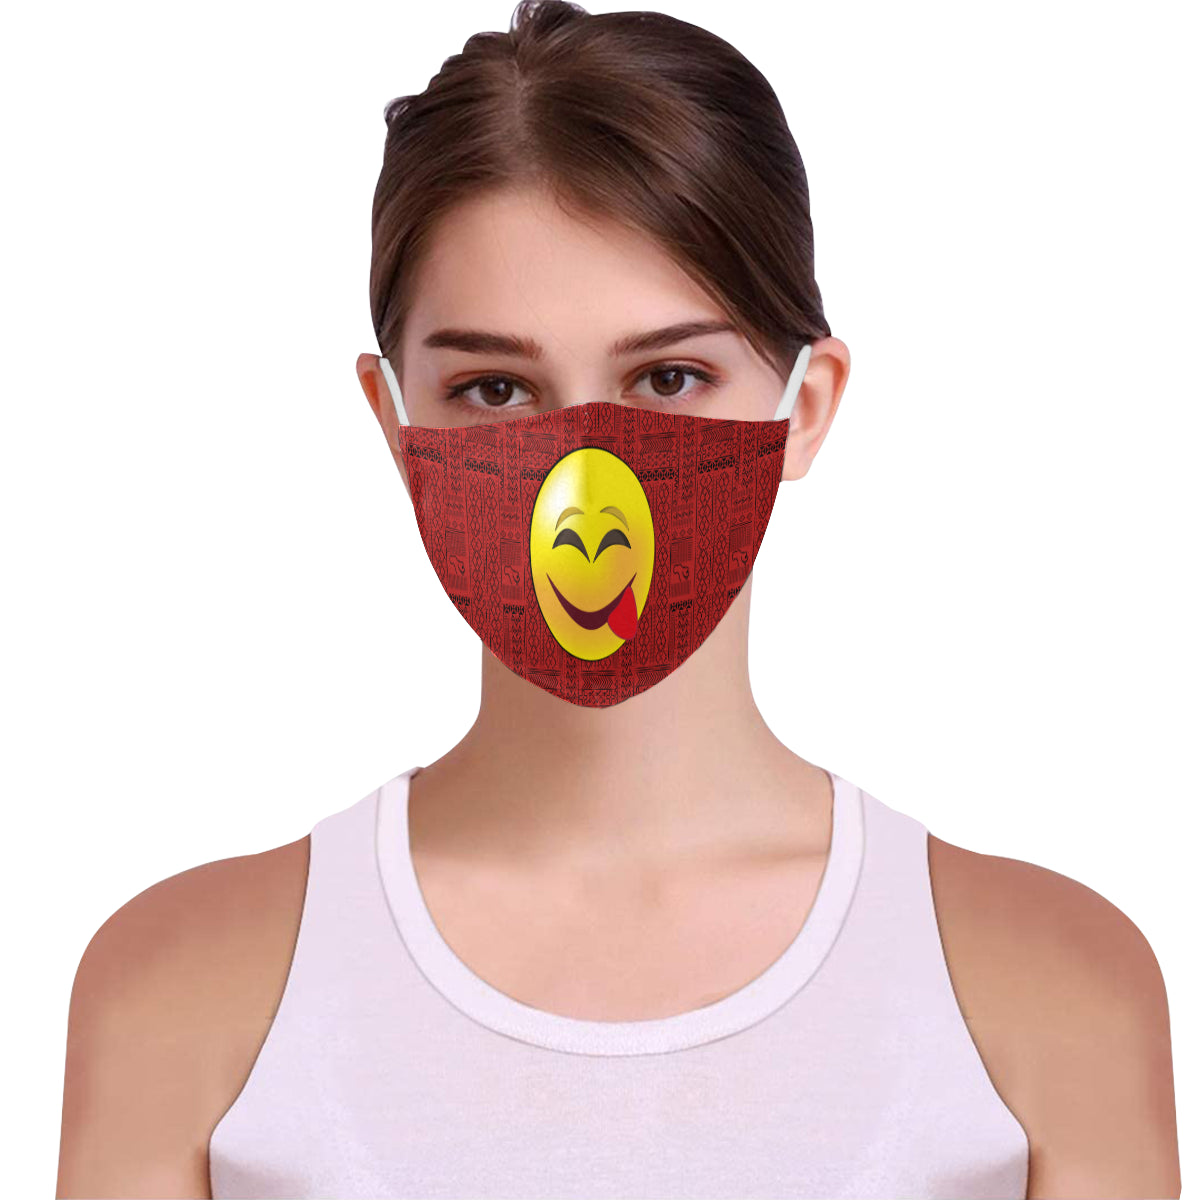 Cheeky! Tribal Print Emoji Cotton Fabric Face Mask with Filter Slot and Adjustable Strap - Non-medical use (2 Filters Included)